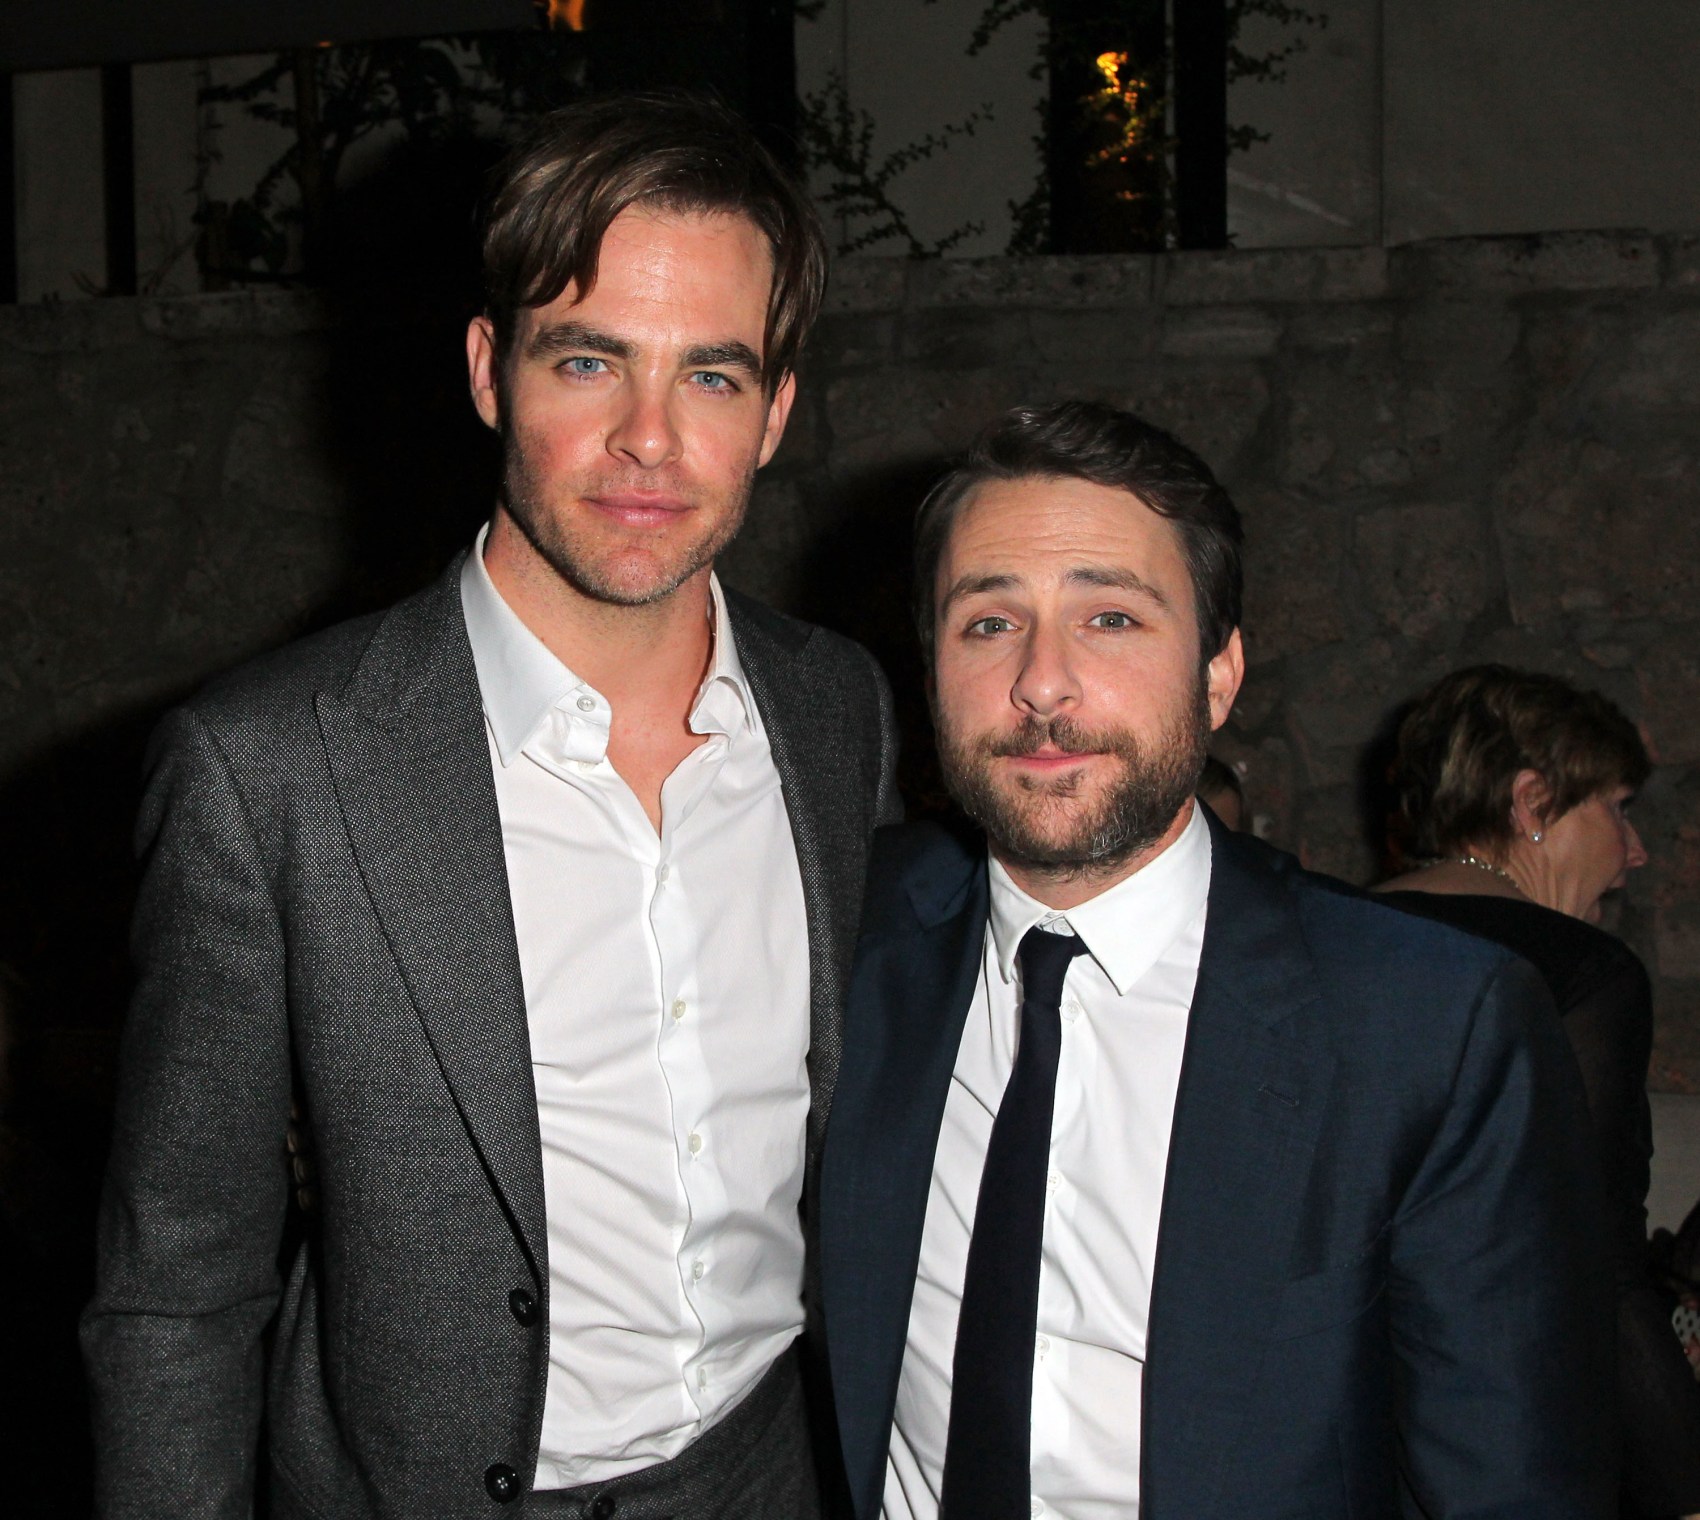 Premiere Of New Line Cinema's "Horrible Bosses 2" - After Party